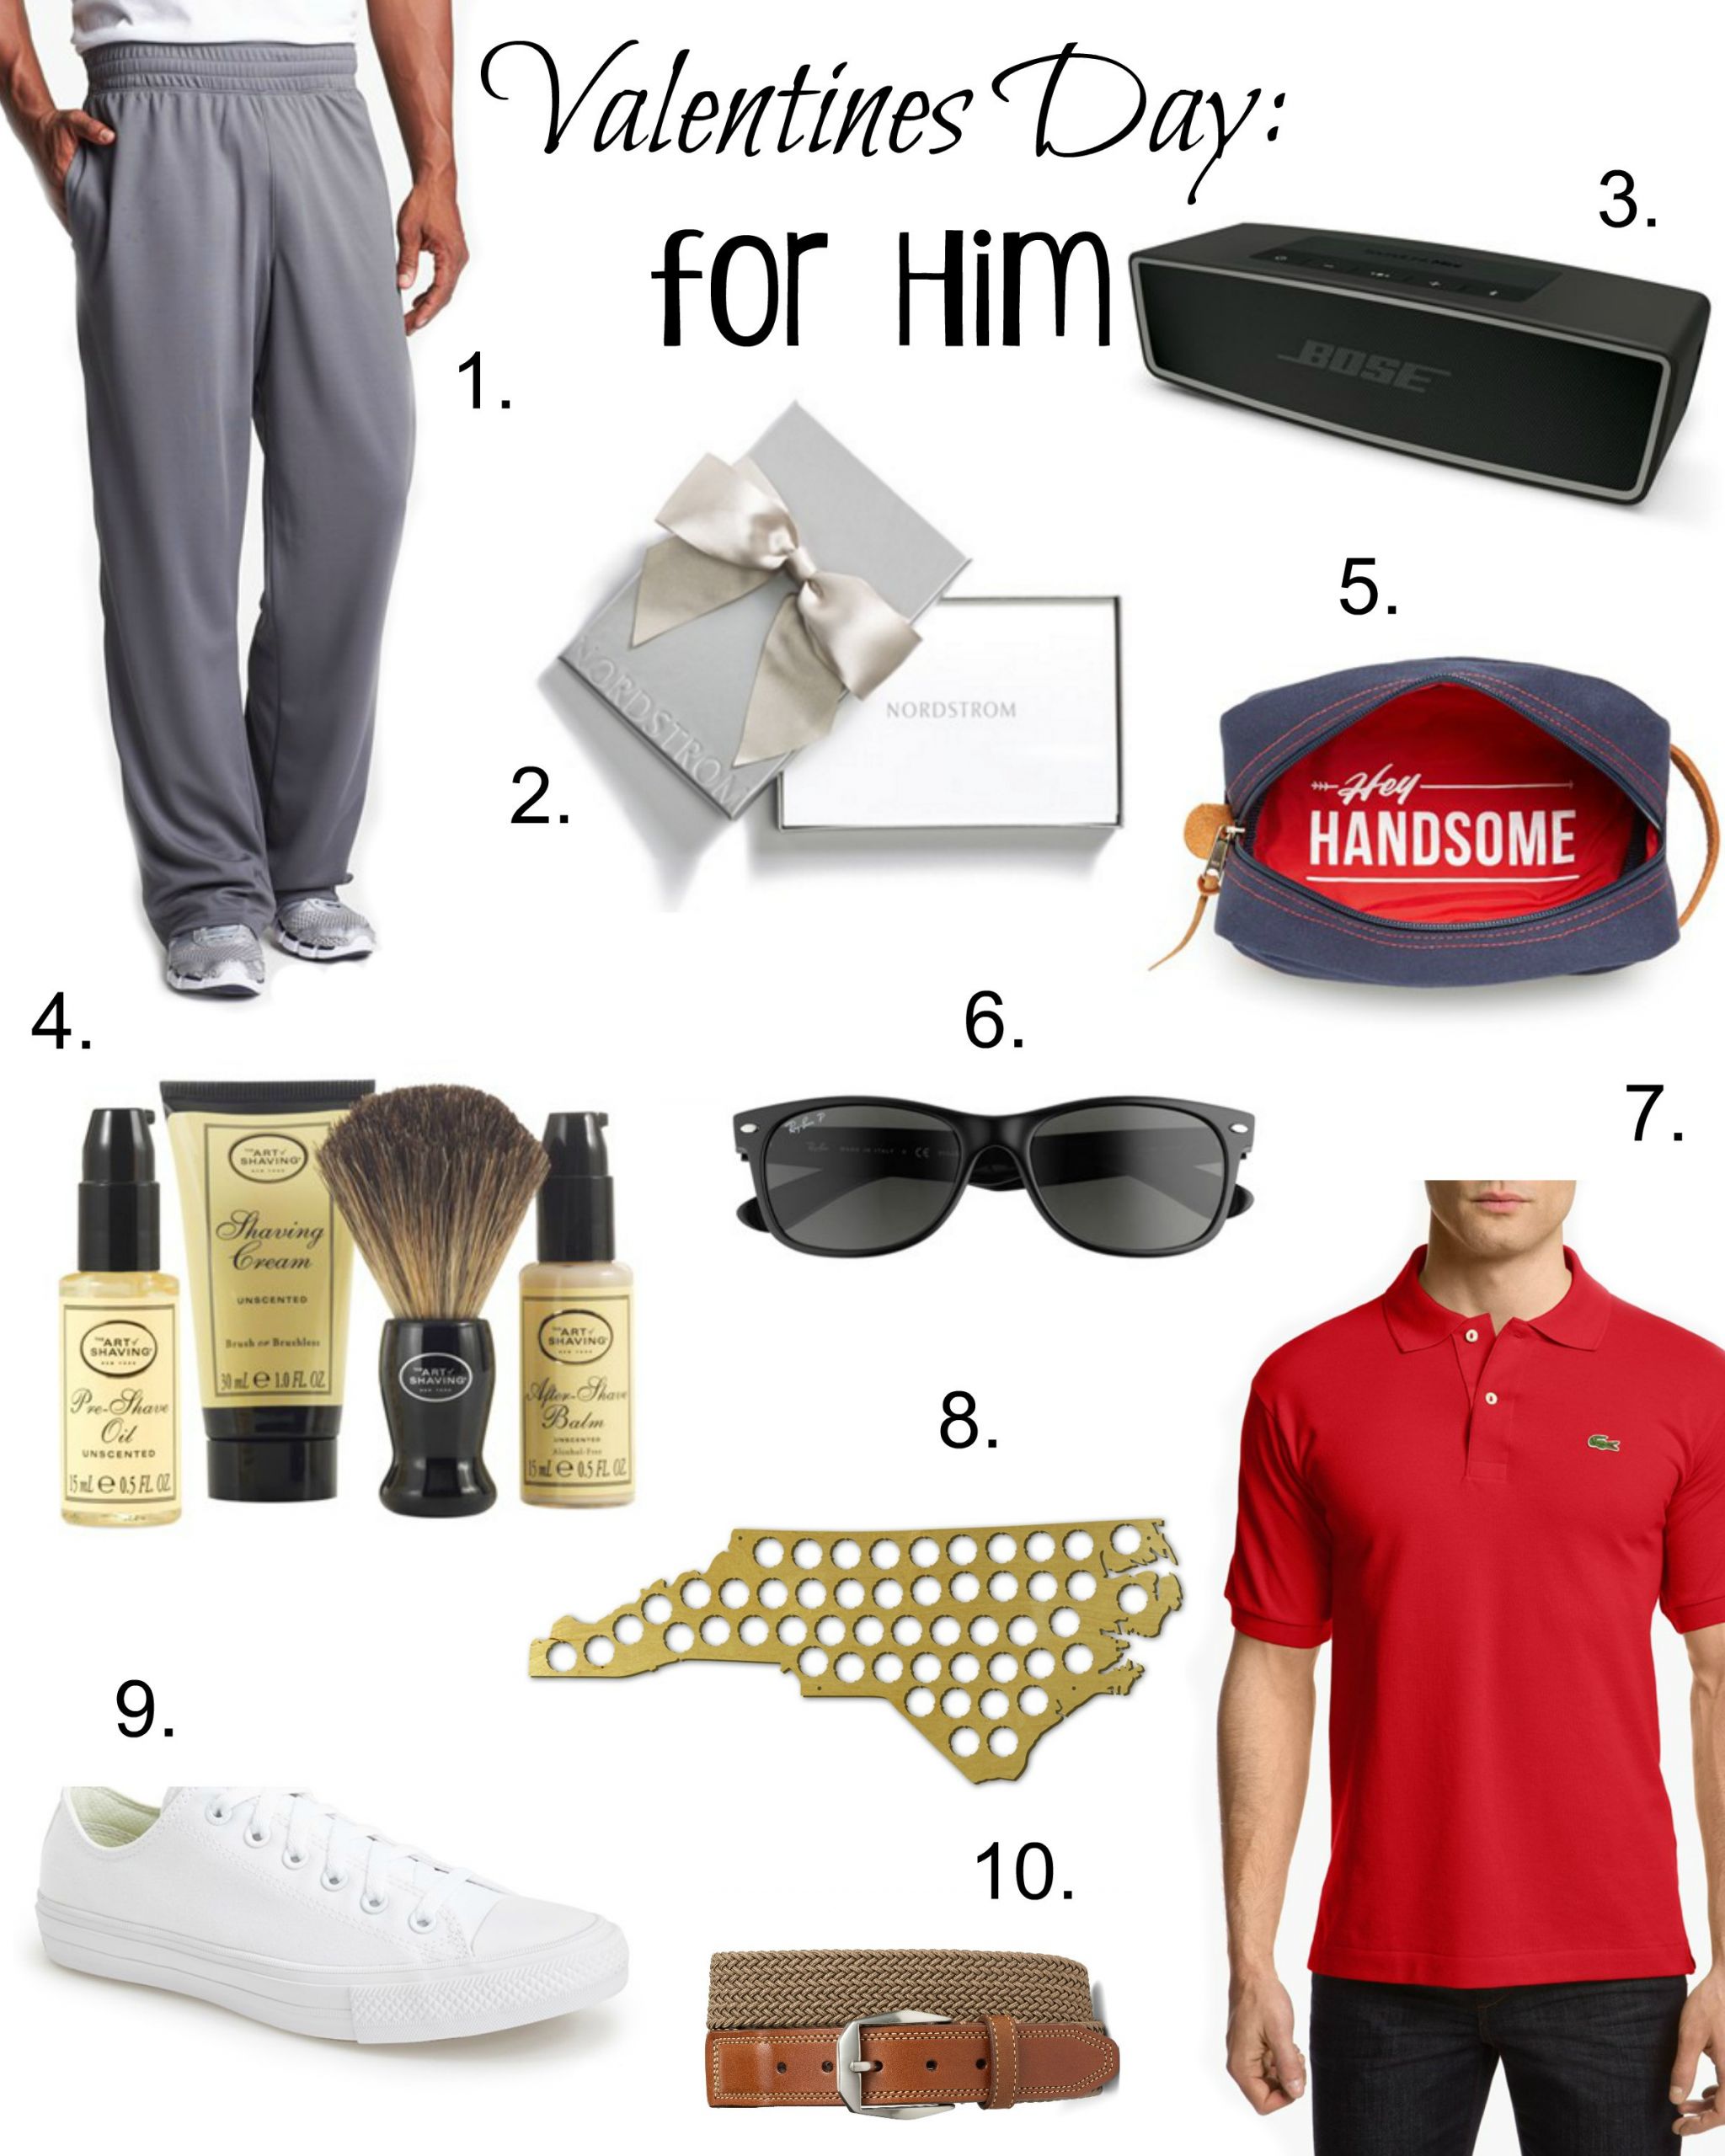 Best Valentines Day Gifts For Him Top 10 Valentines Day Gifts For Him